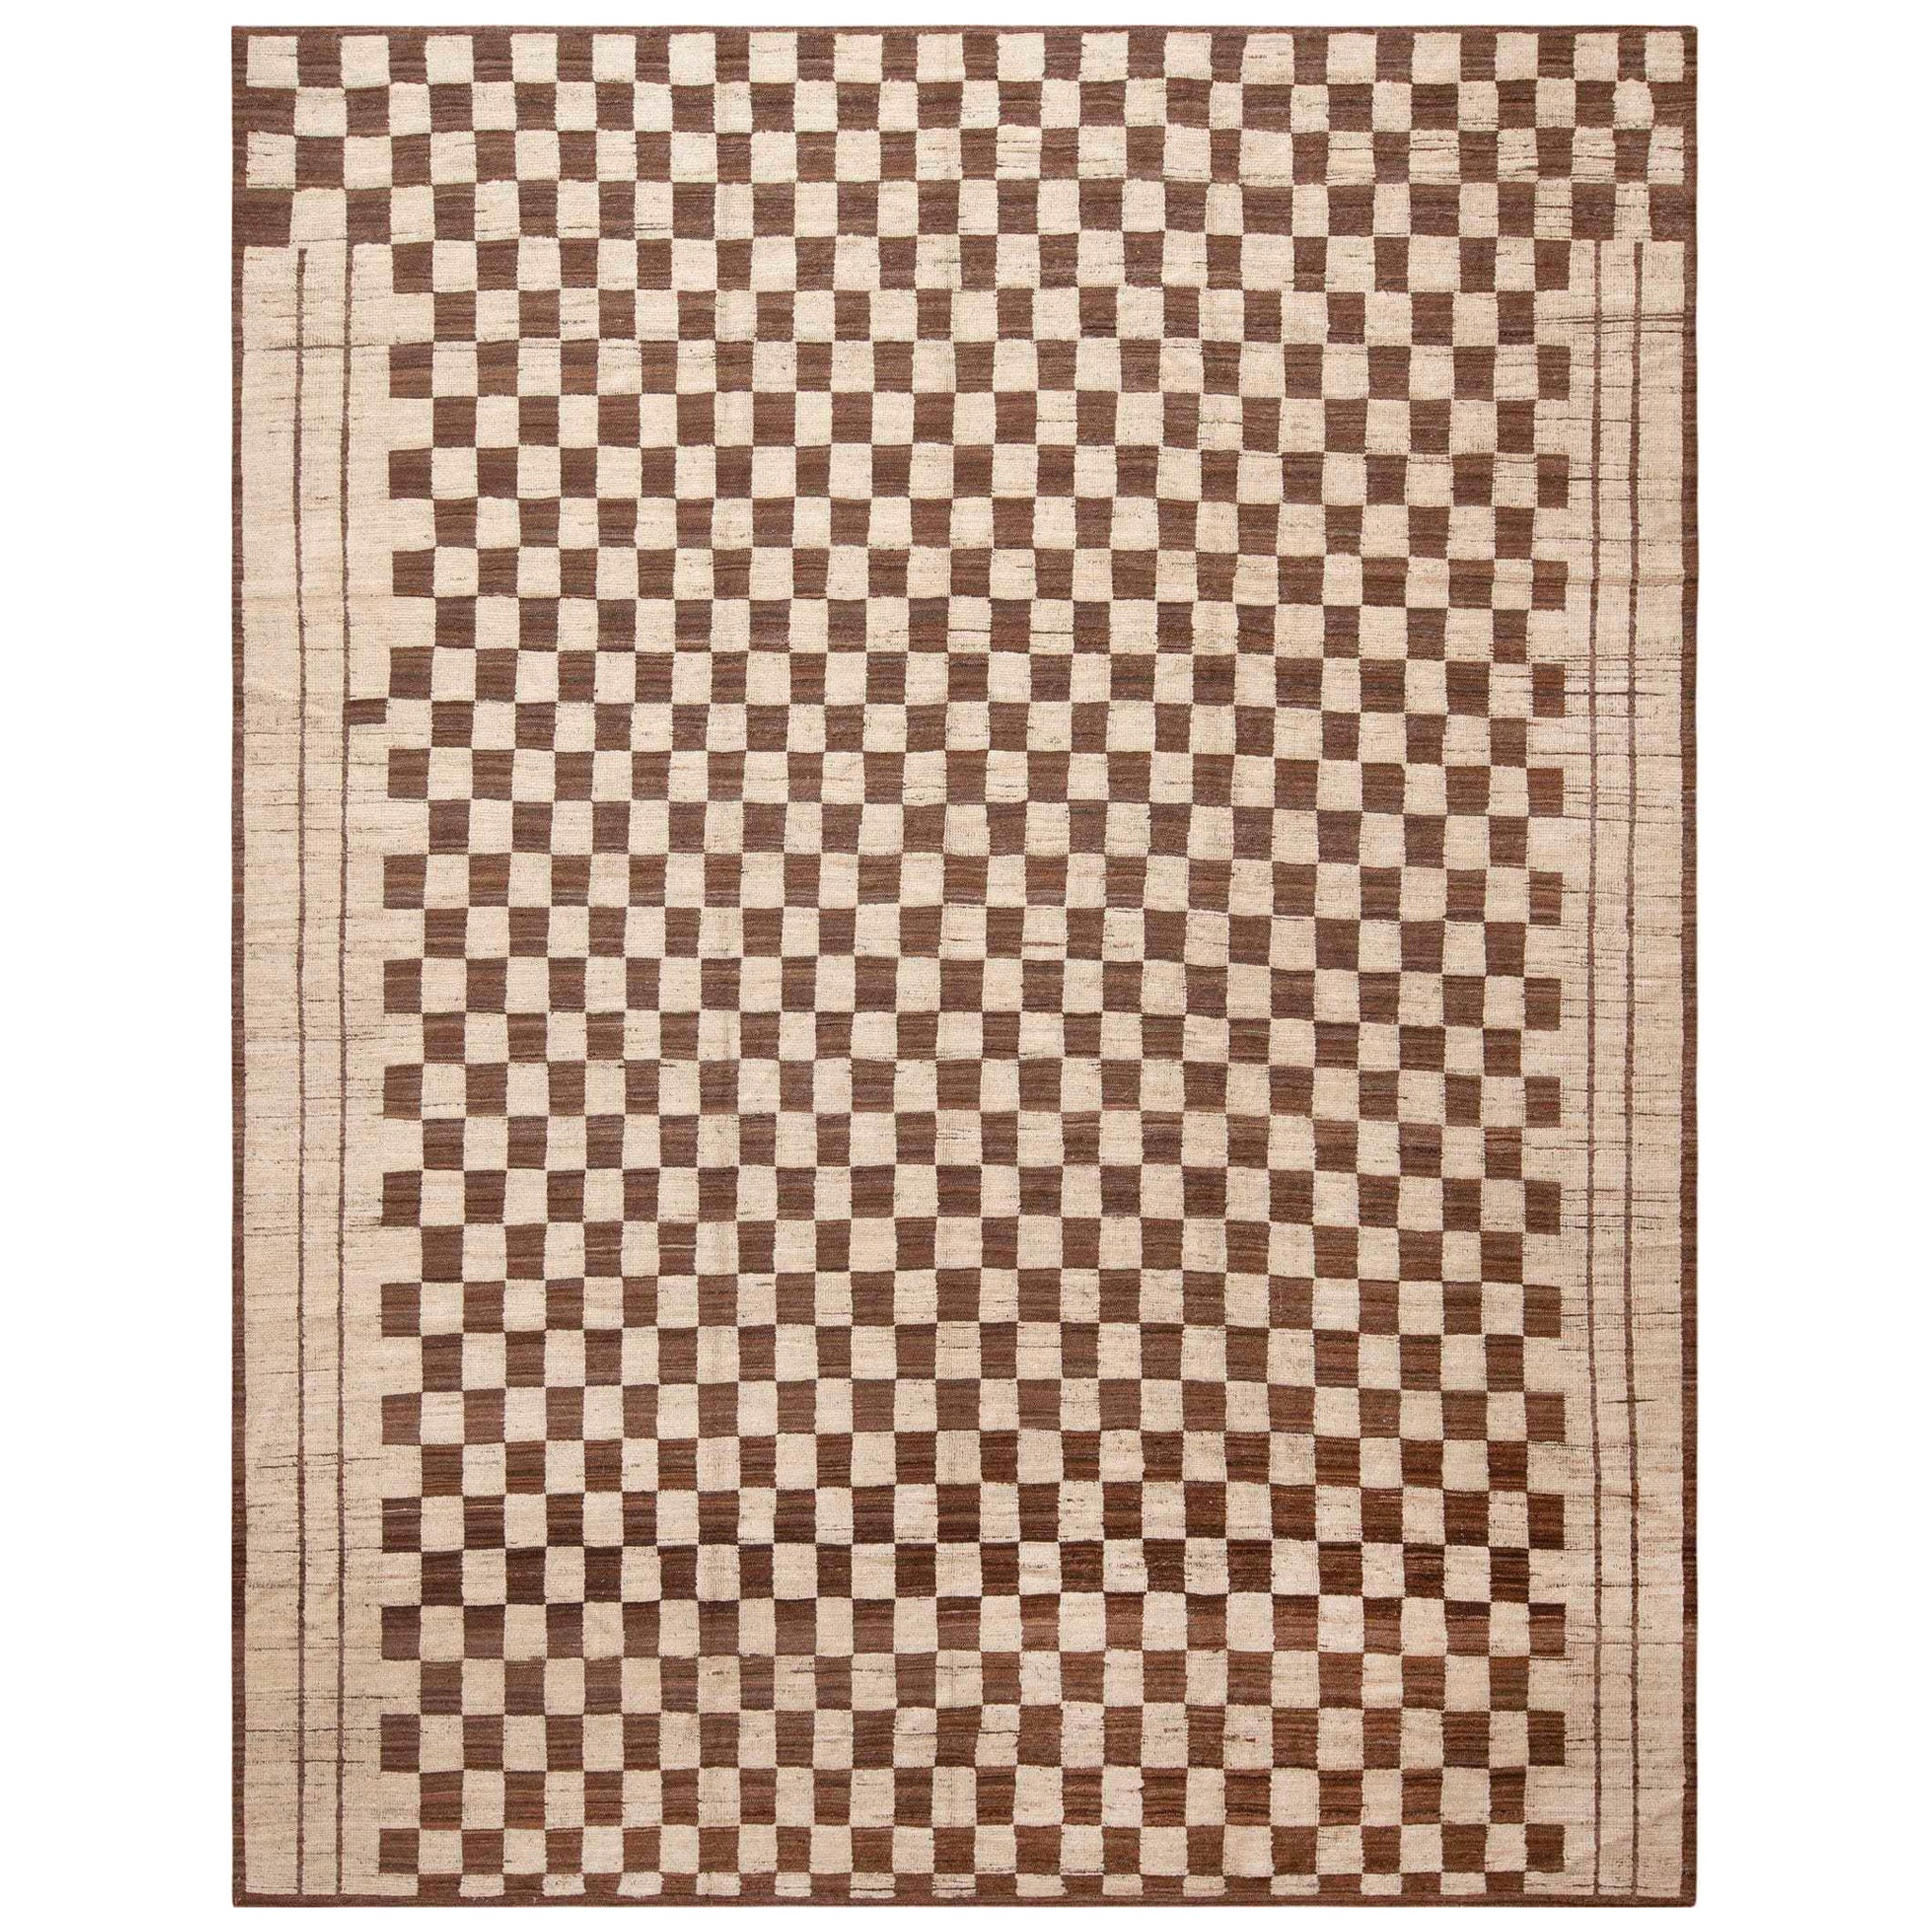 Nazmiyal Collection Modern Moroccan Checkerboard Design Area Rug 9'5" x 12'3" For Sale